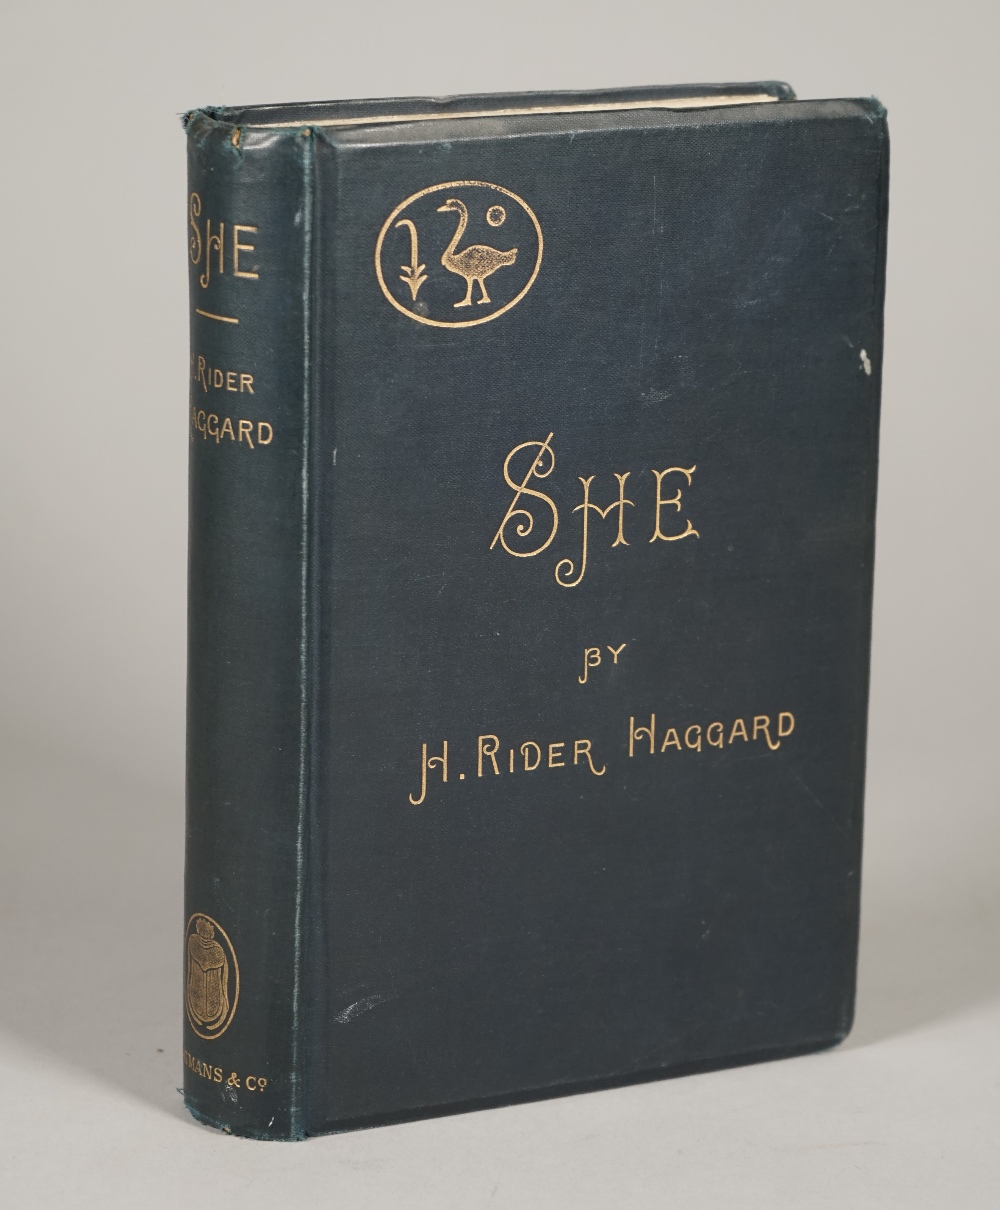 RIDER HAGGARD, Henry (1856-1925). She. A History of Adventure. London: Longmans, Green, and Co.